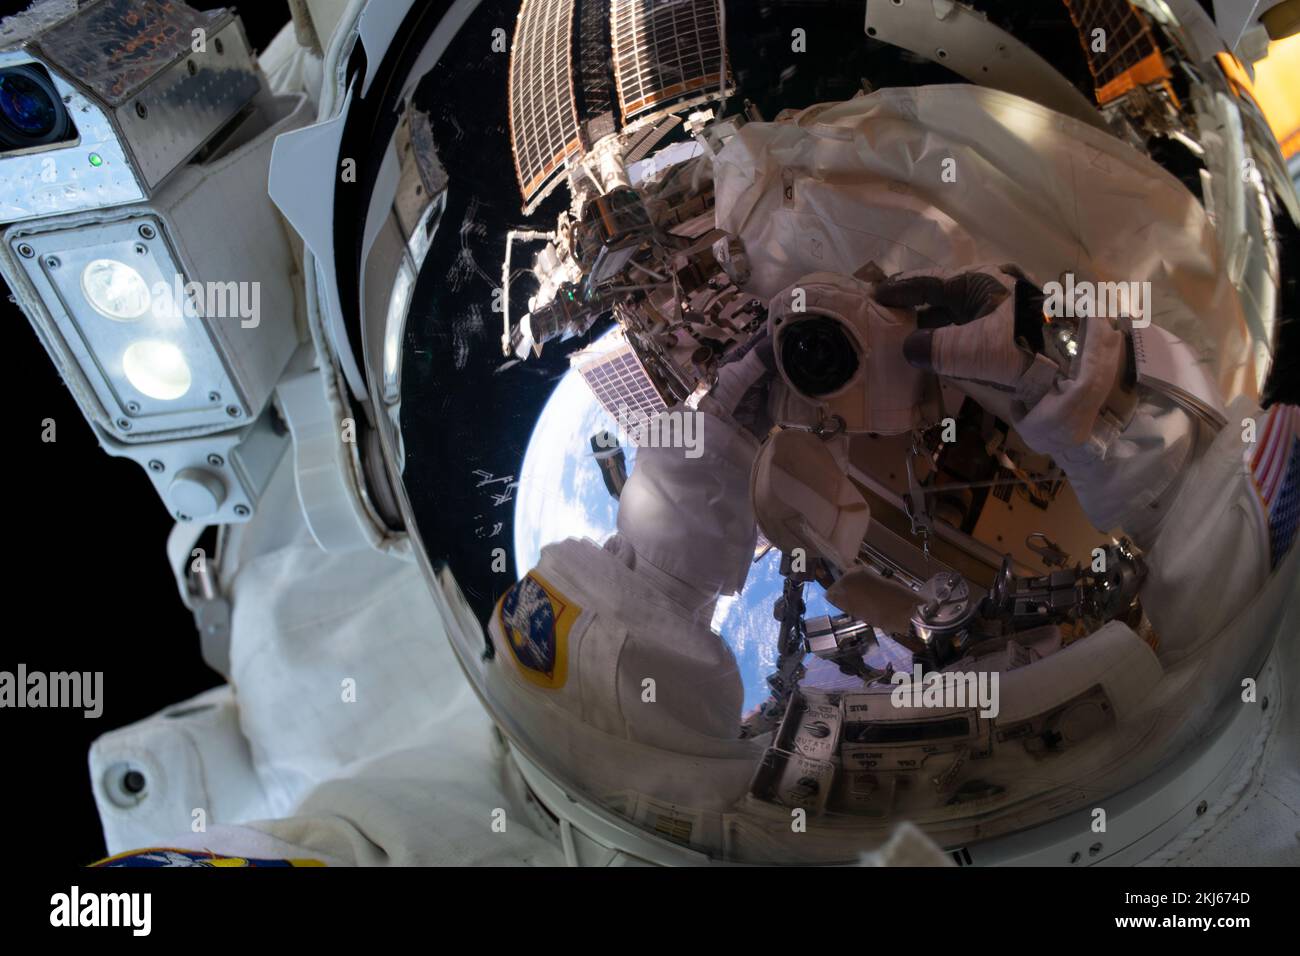 International Space Station, Earth Orbit. 15 November, 2022. NASA astronaut and Expedition 68 Flight Engineer Frank Rubio takes a selfie during a spacewalk outside the International Space Station, November 15, 2022 in Earth Orbit. The 7 hours and 11 minute spacewalk to assemble a mounting bracket was the first for Rubio and fellow astronaut Josh Cassada.  Credit: Frank Rubio/NASA/Alamy Live News Stock Photo